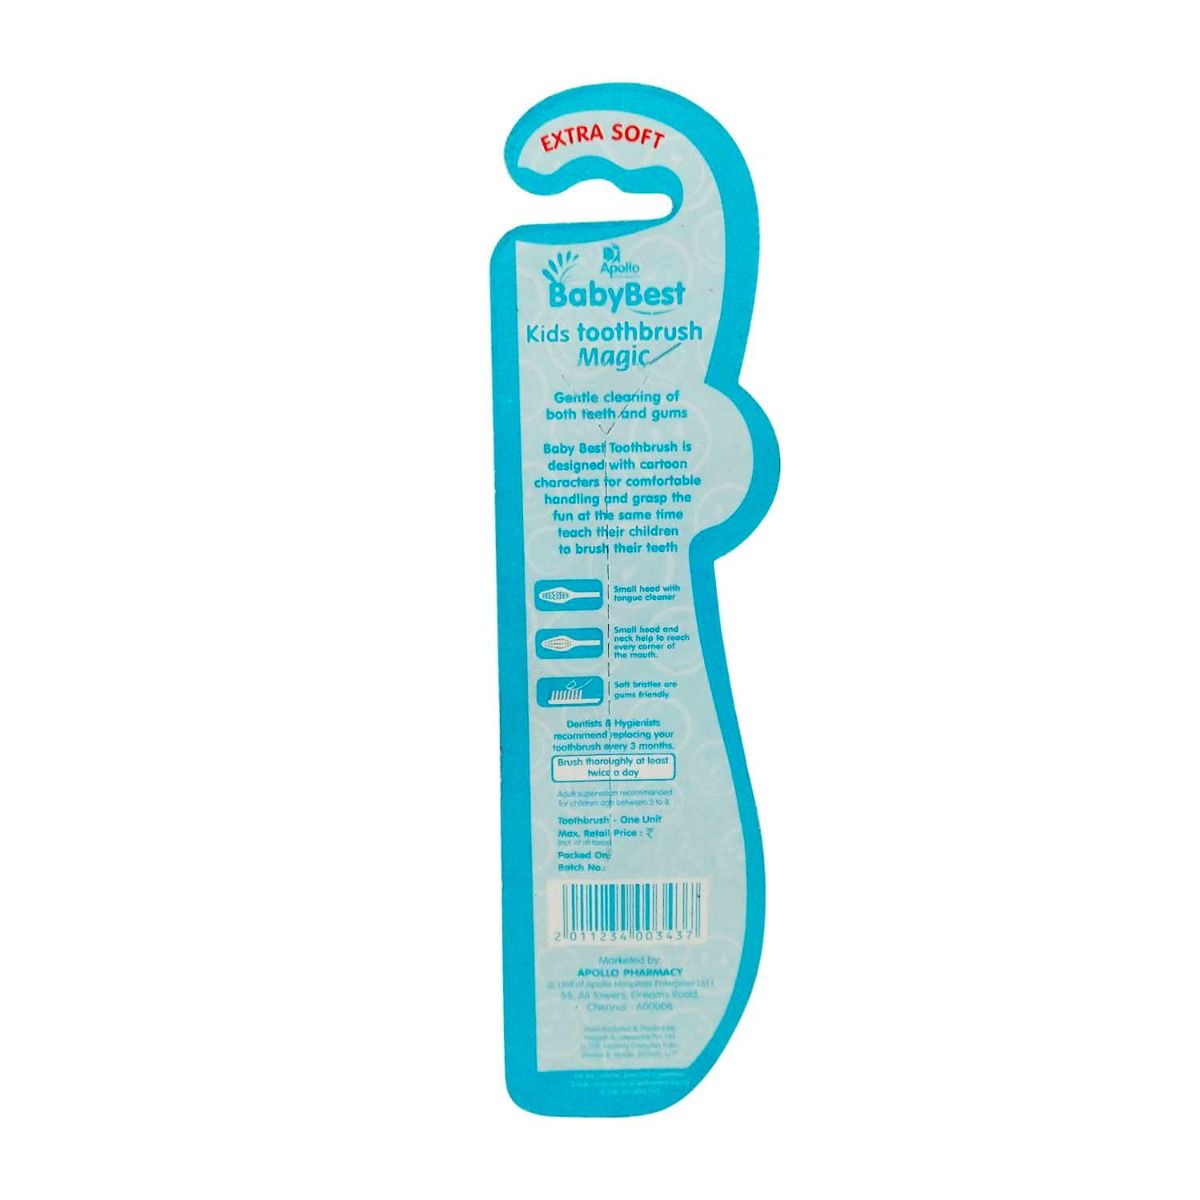 Apollo Pharmacy BabyBest Magic Extra Soft Kids Toothbrush, 1 Count, Pack of 1 